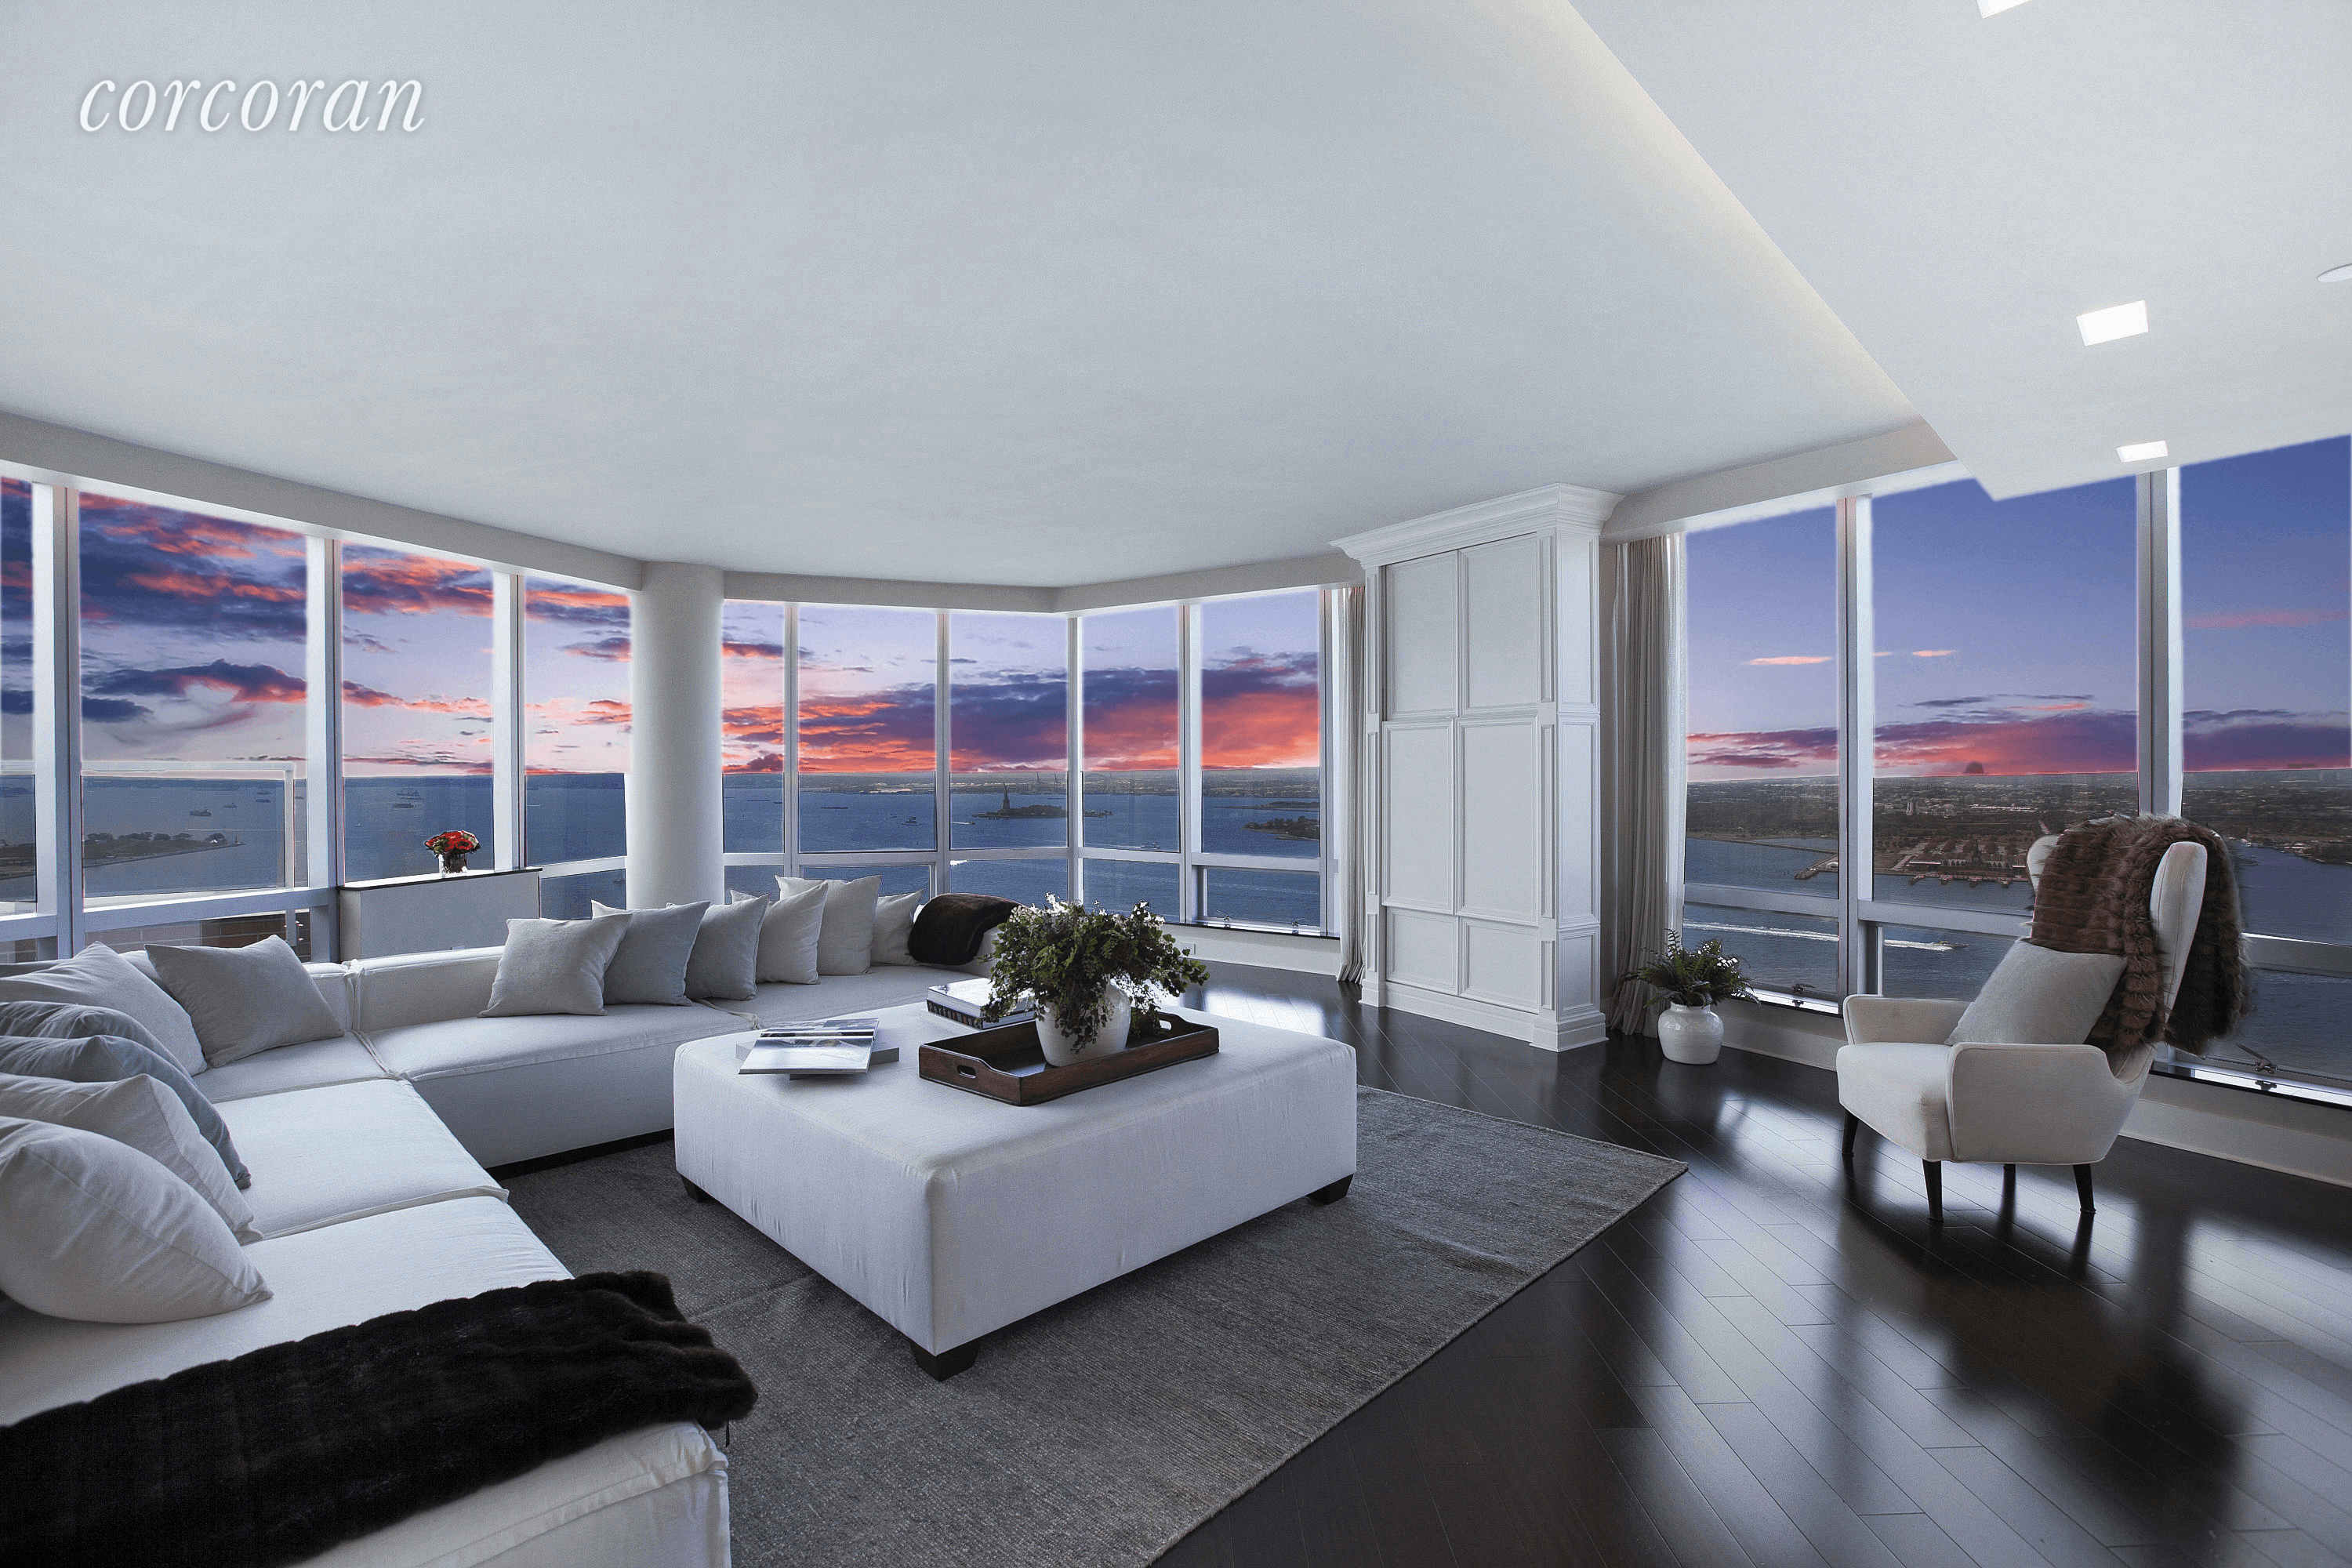 Perched on the highest floors of The Ritz Carlton Residences, this ultra luxurious, extremely private, 4 bedroom, 5 bath duplex home with grand terrace features spectacular and iconic waterfront views ...